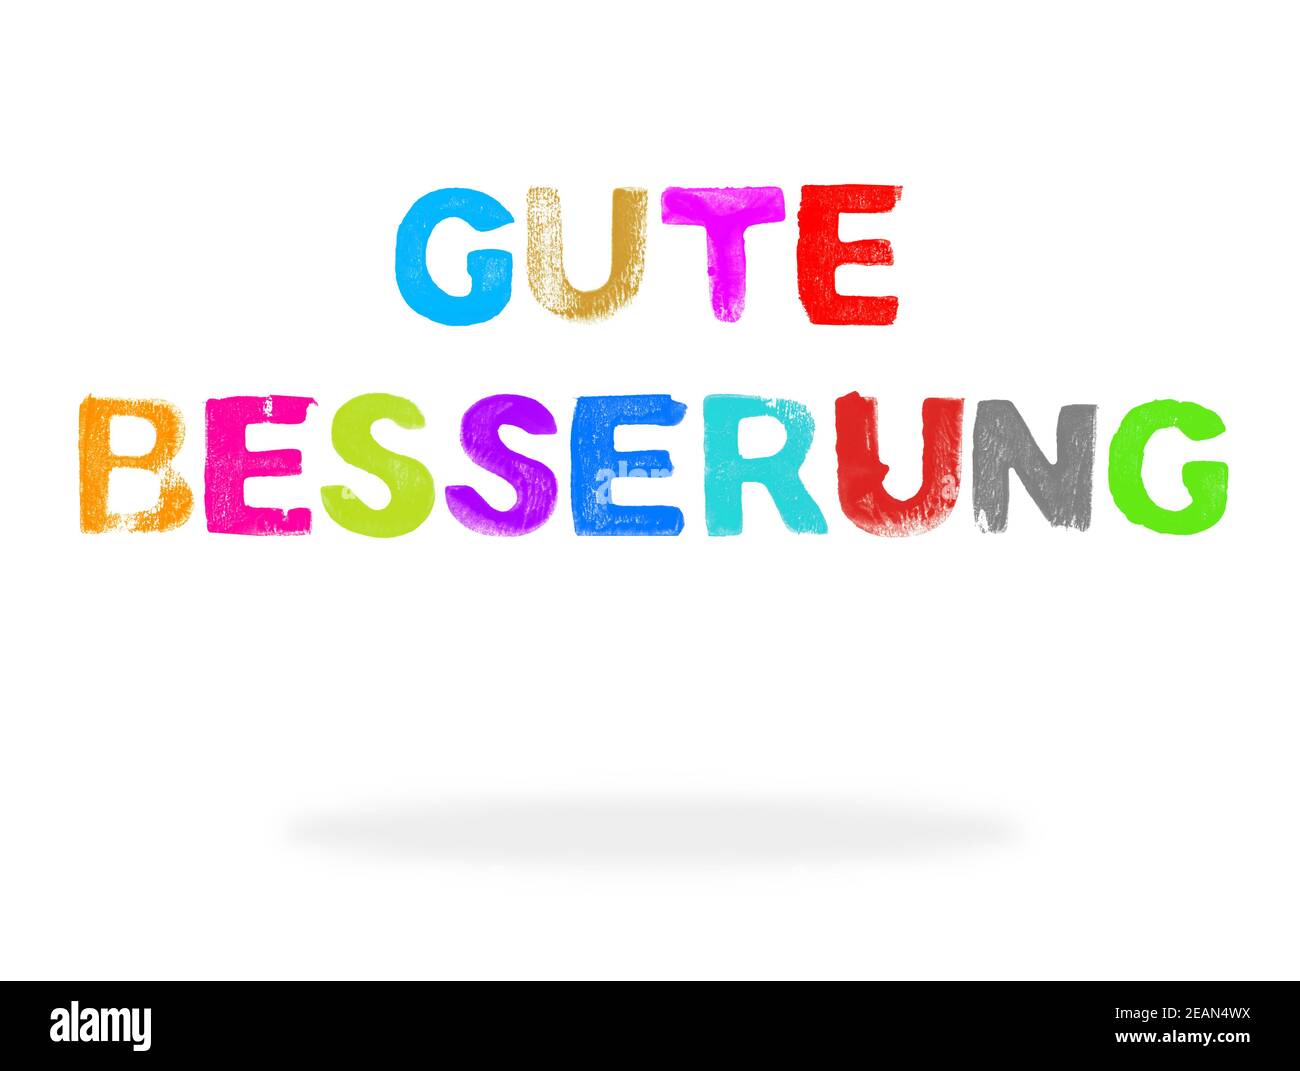 Colorful stencil text with shadow: Get well soon in german language Stock Photo